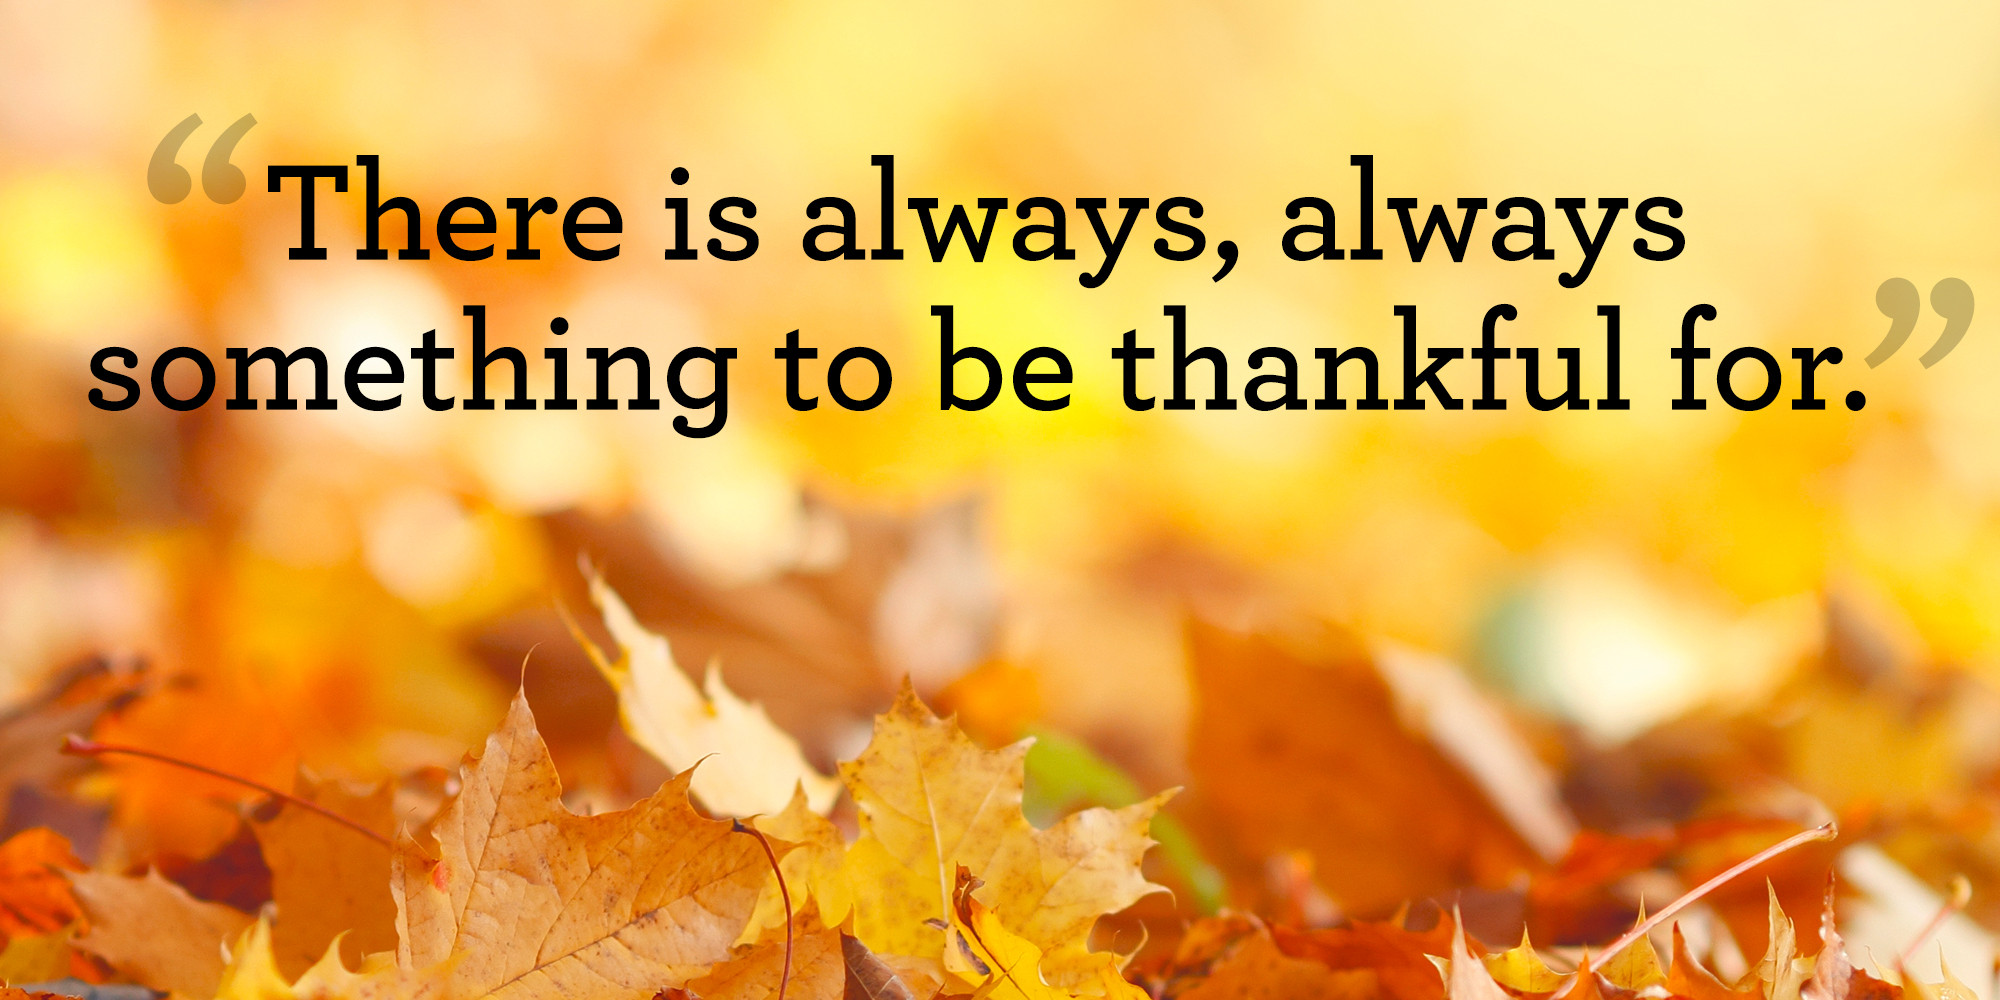 Thanksgiving Quotes Images
 10 Best Thanksgiving Quotes Meaningful Thanksgiving Sayings